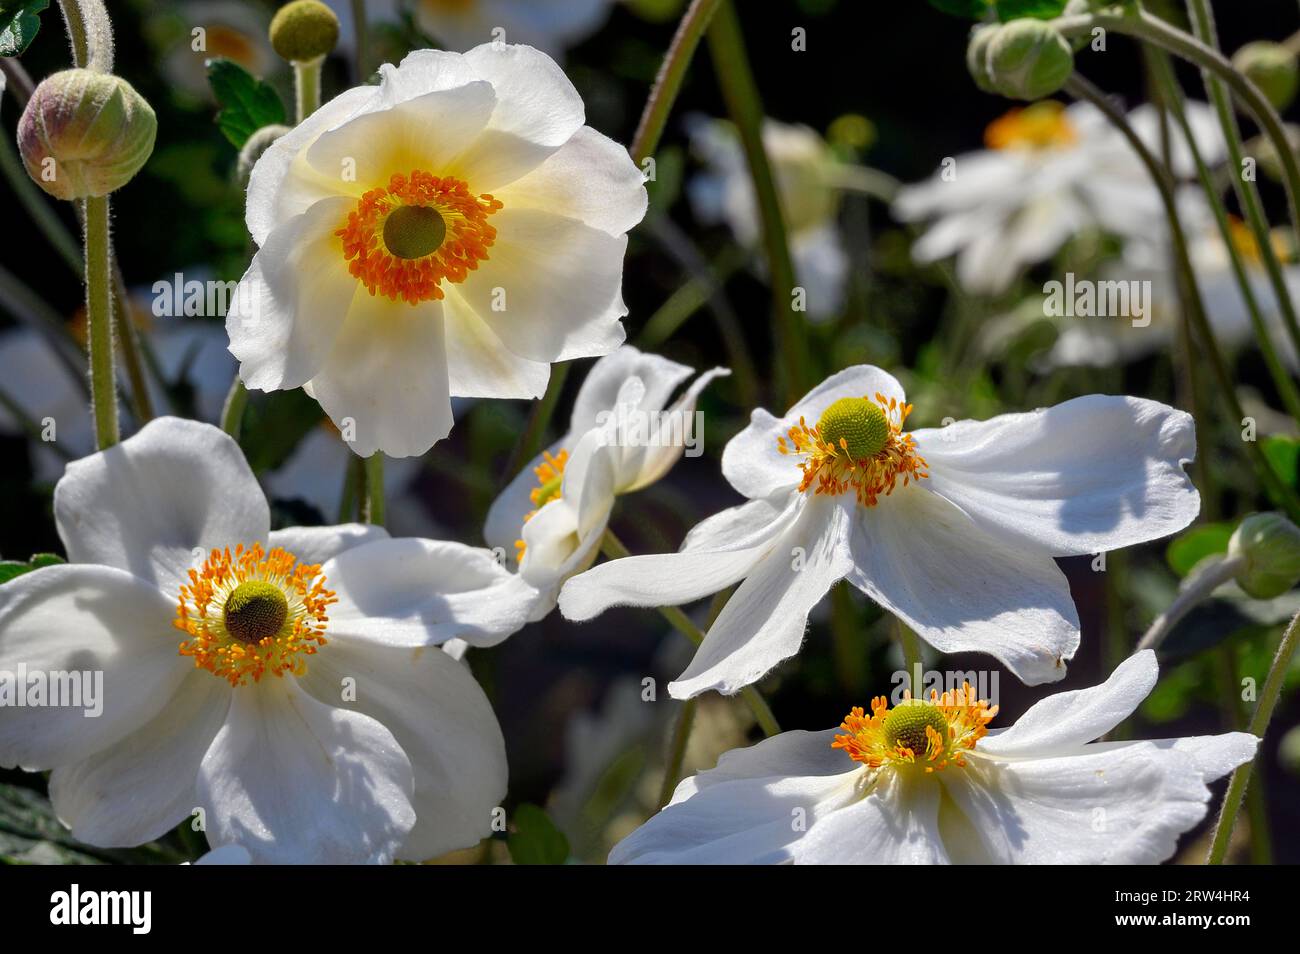 Flowers and buds of the Japanese anemone hupehensis (Anemone hupehensis var. japonica), Allgaeu, Bavaria, Germany Stock Photo